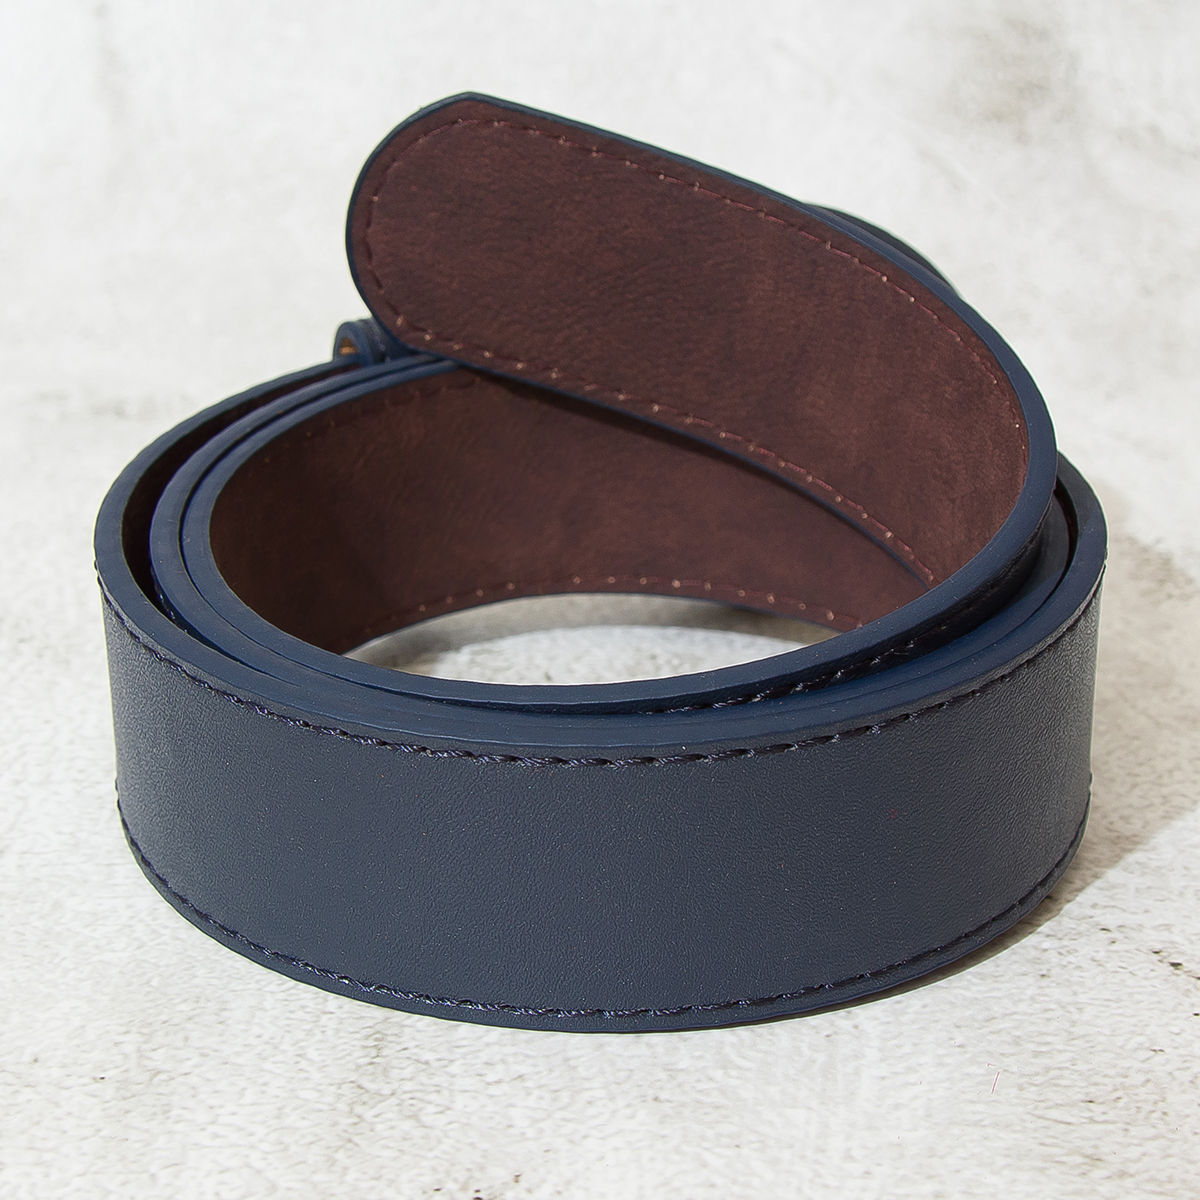 Statement Blue Faux Leather with Gold Buckle